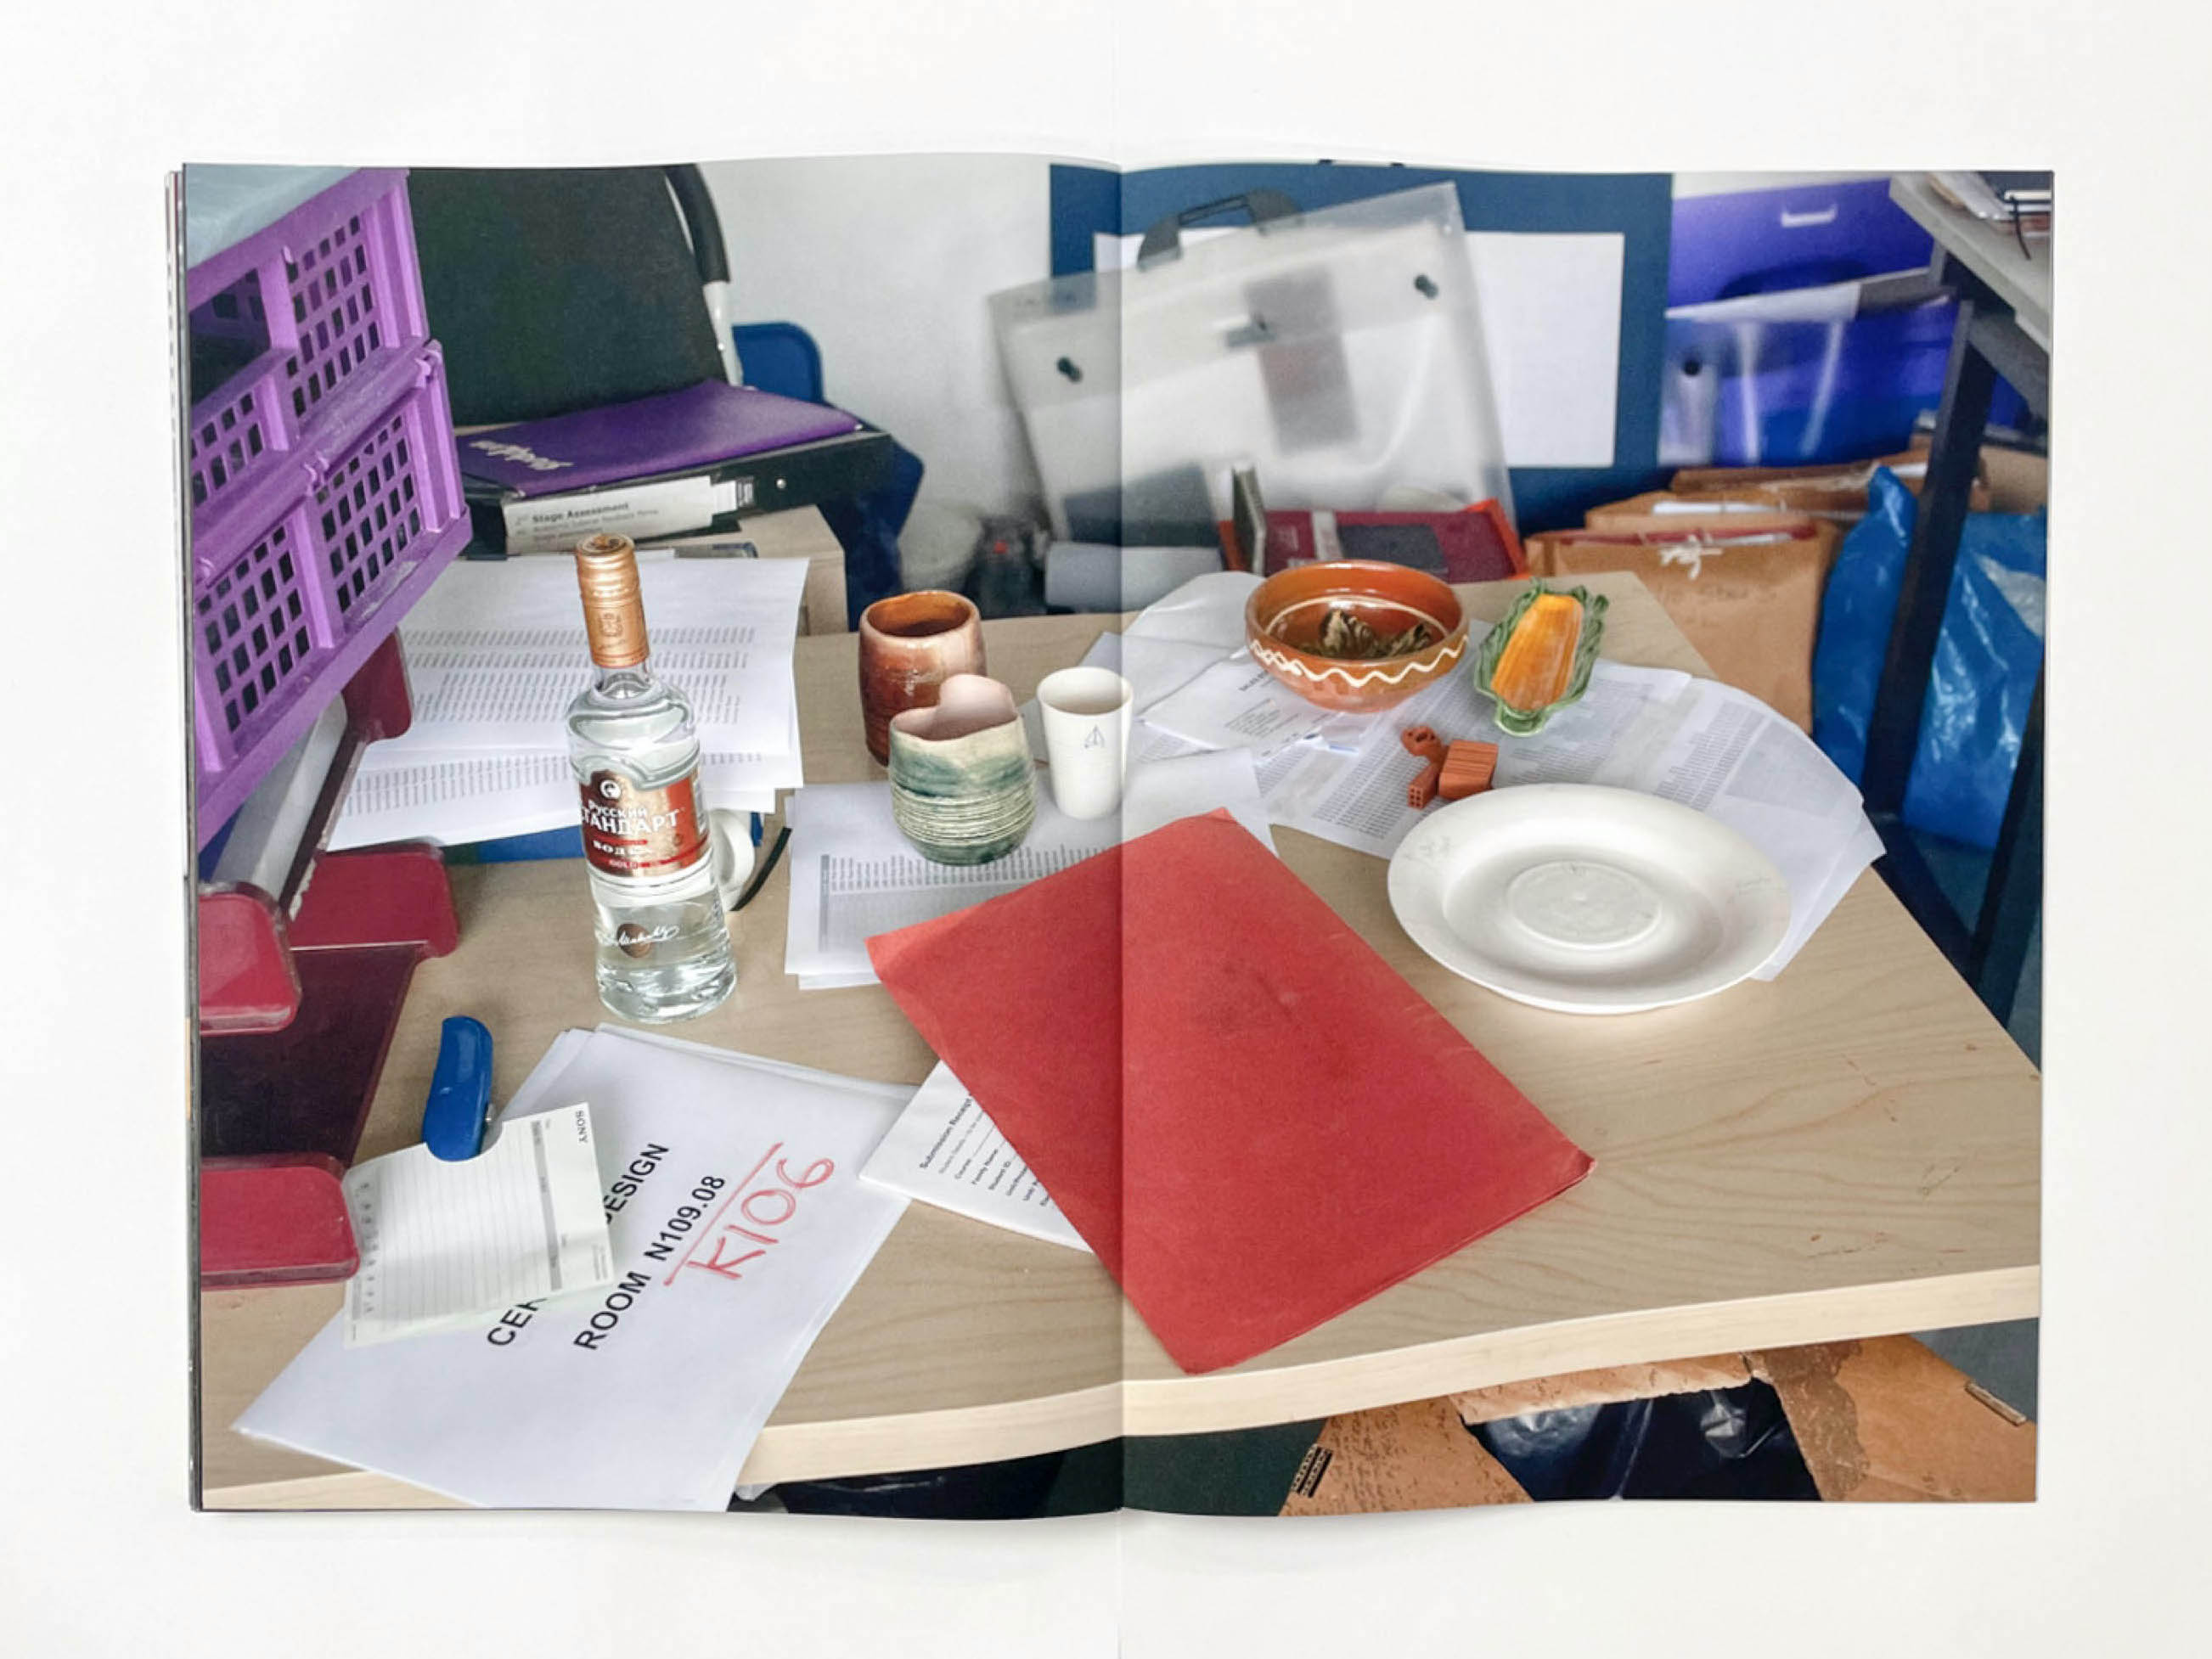 the chaotic contents of a table with a bottle of ouzo or vodka, cups and a piece of paper stating Ceramic Design room k106